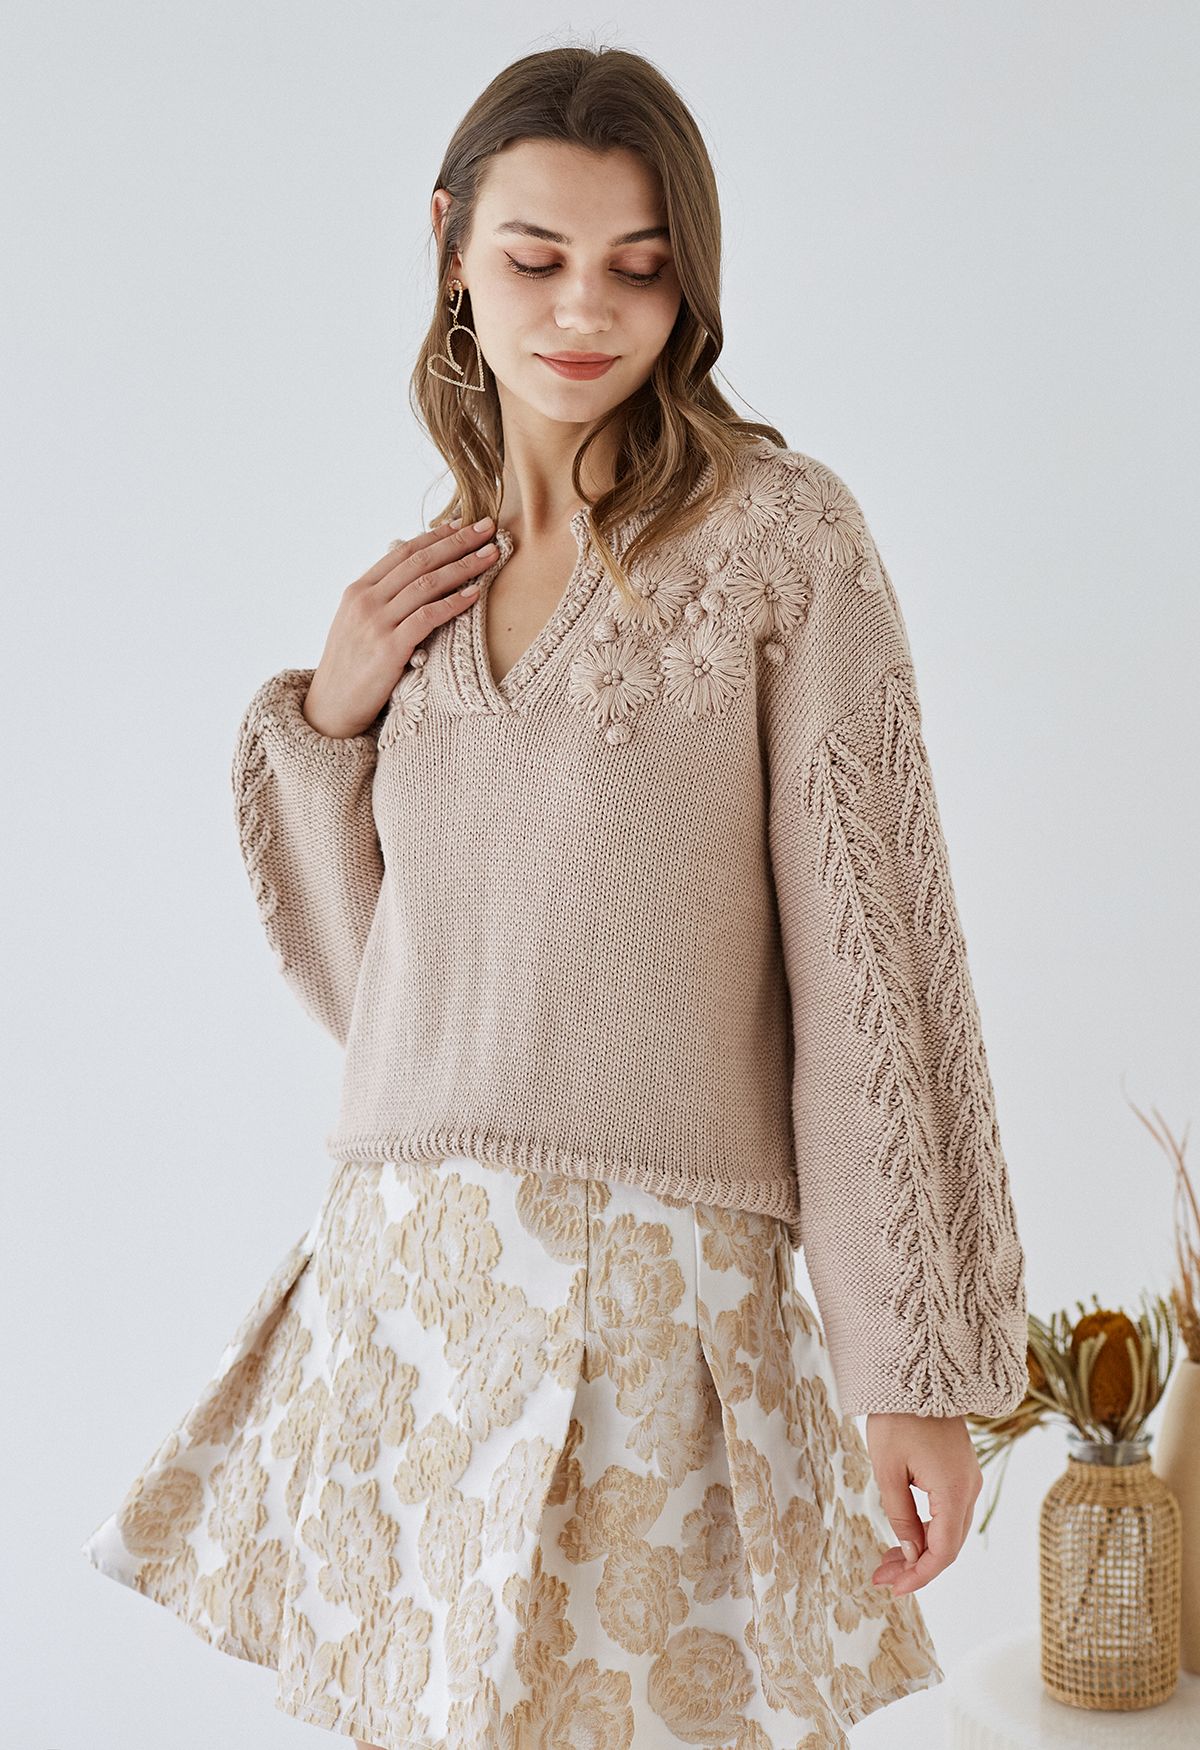 Blooming Passion Floral Stitch V-Neck Knit Sweater in Taupe